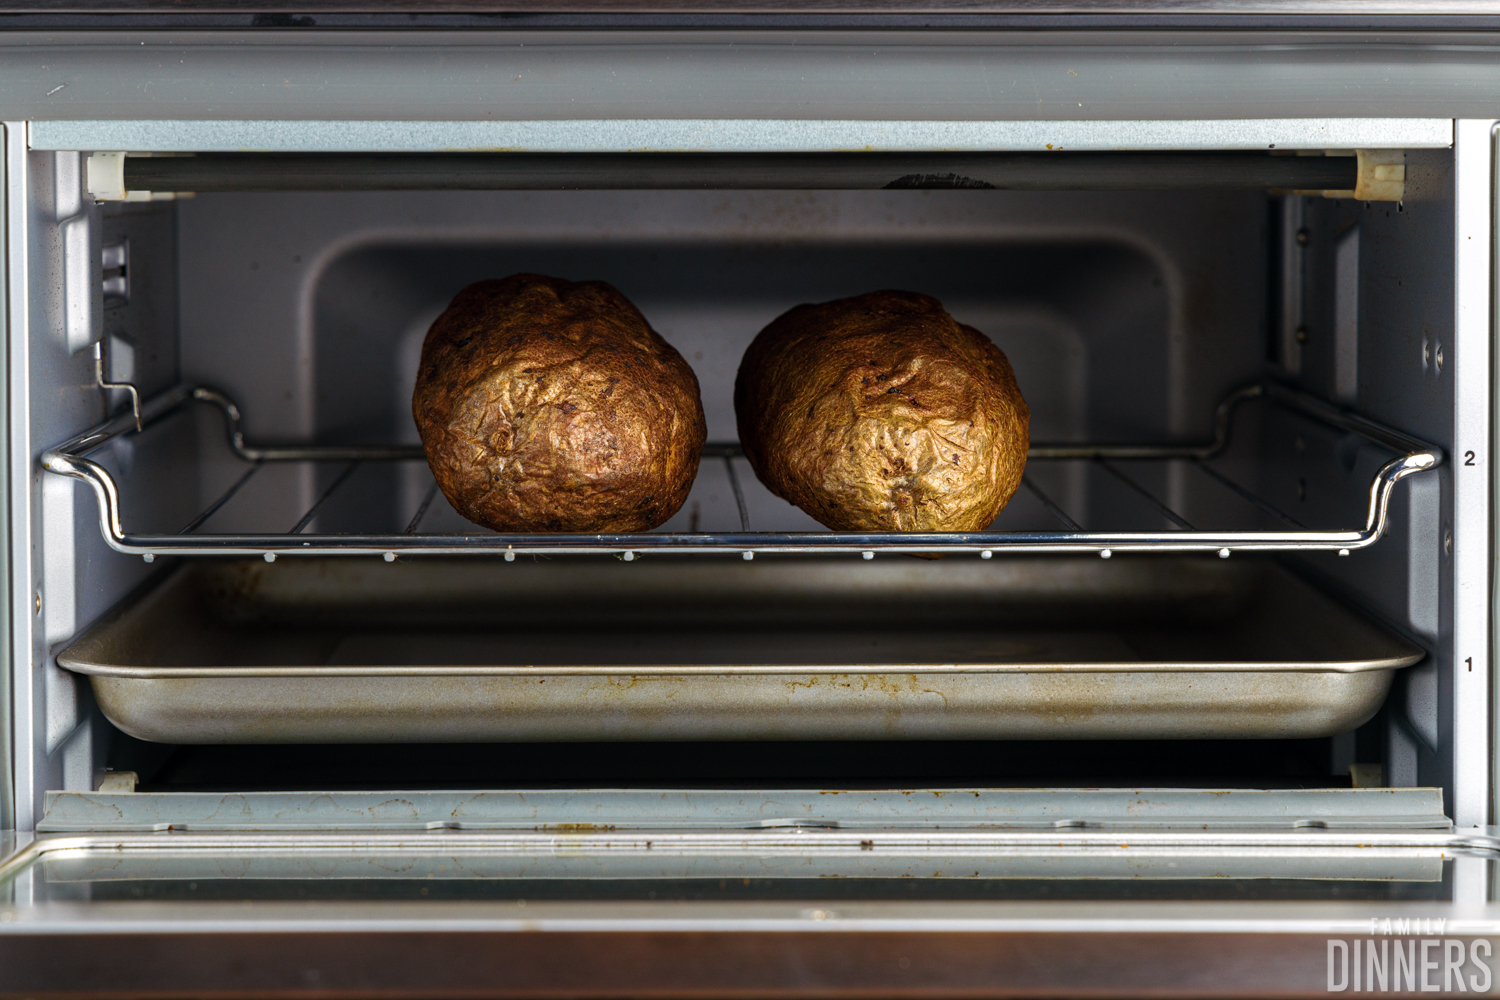 Potatoes in toaster oven